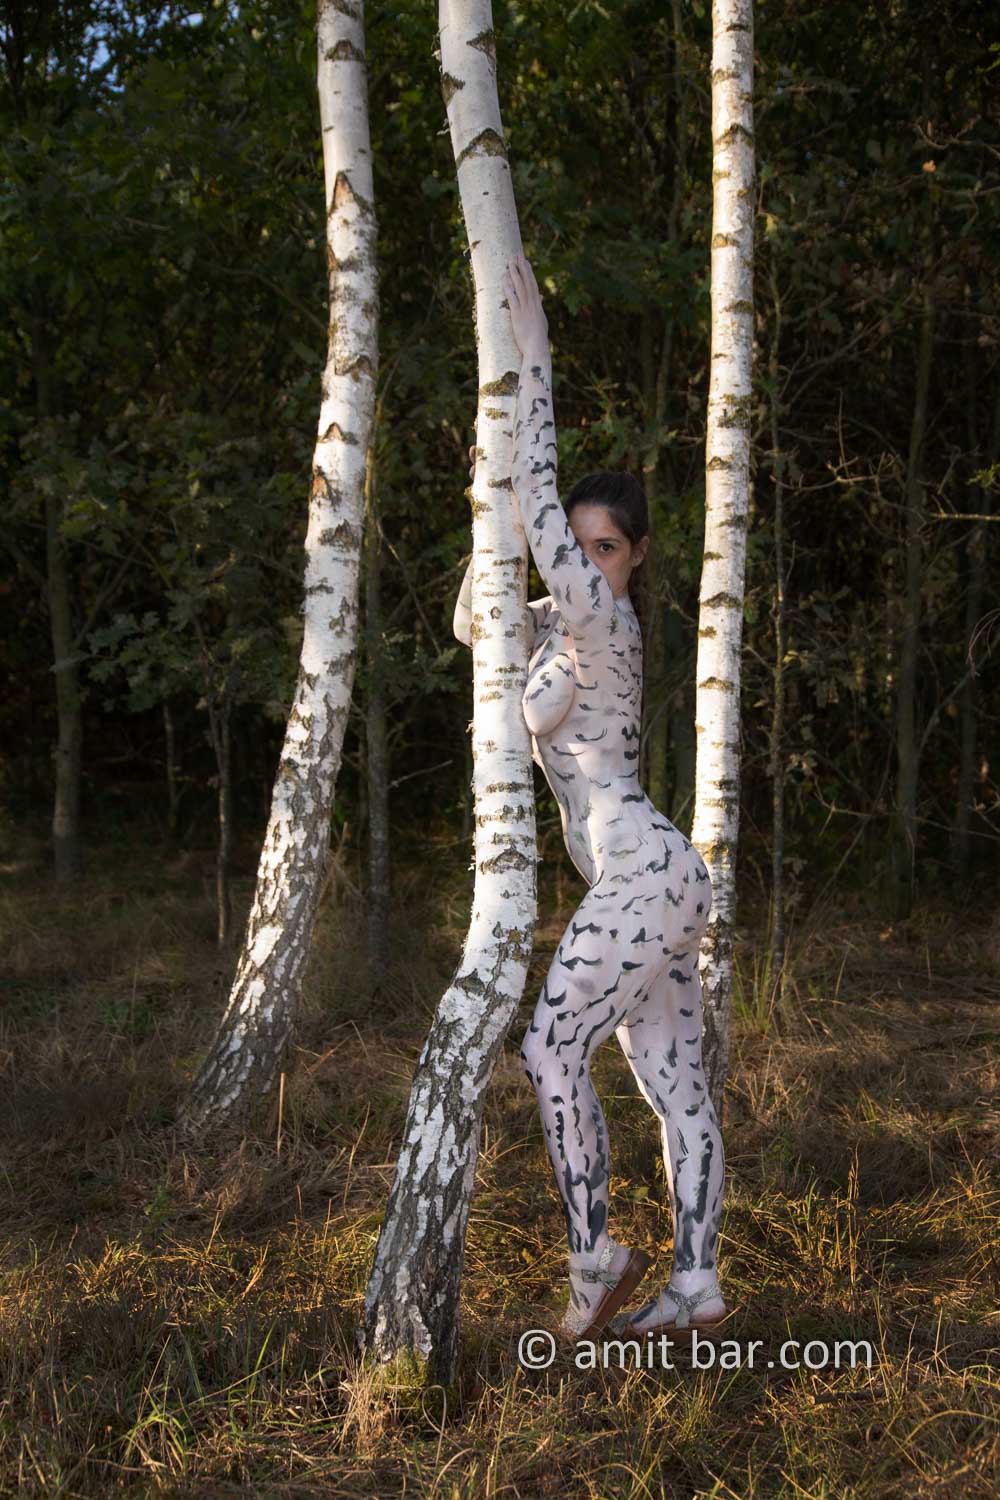 Birches grove II: A body-painting model is strolling among the white trunks of birch trees in De Achterhoek, The Netherlands